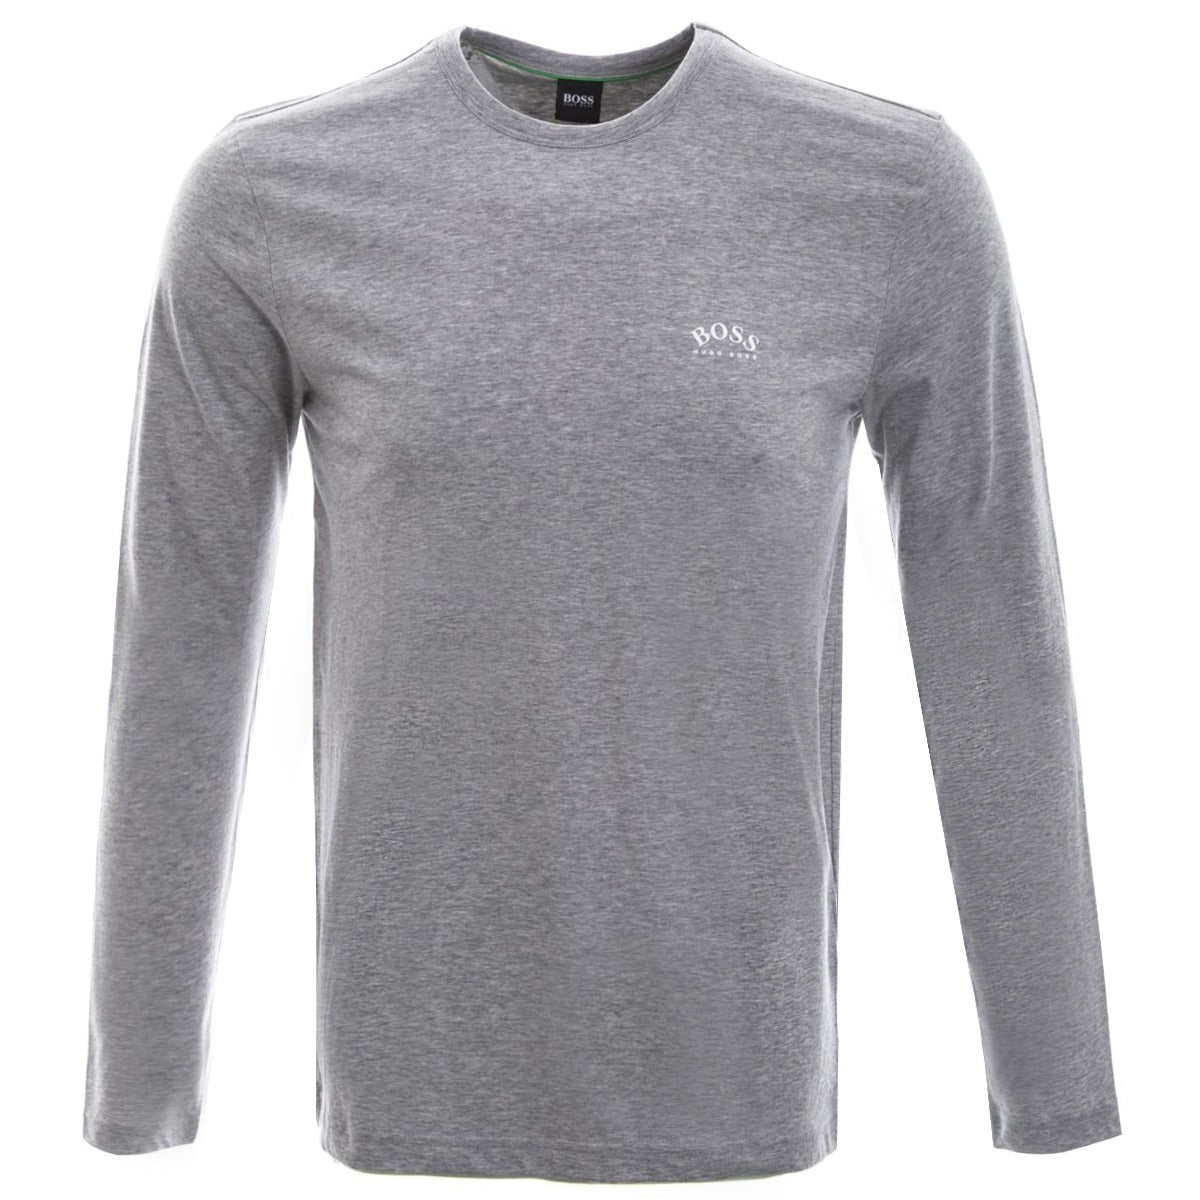 BOSS Togn Curved Long Sleeve T-Shirt in Pastel Grey